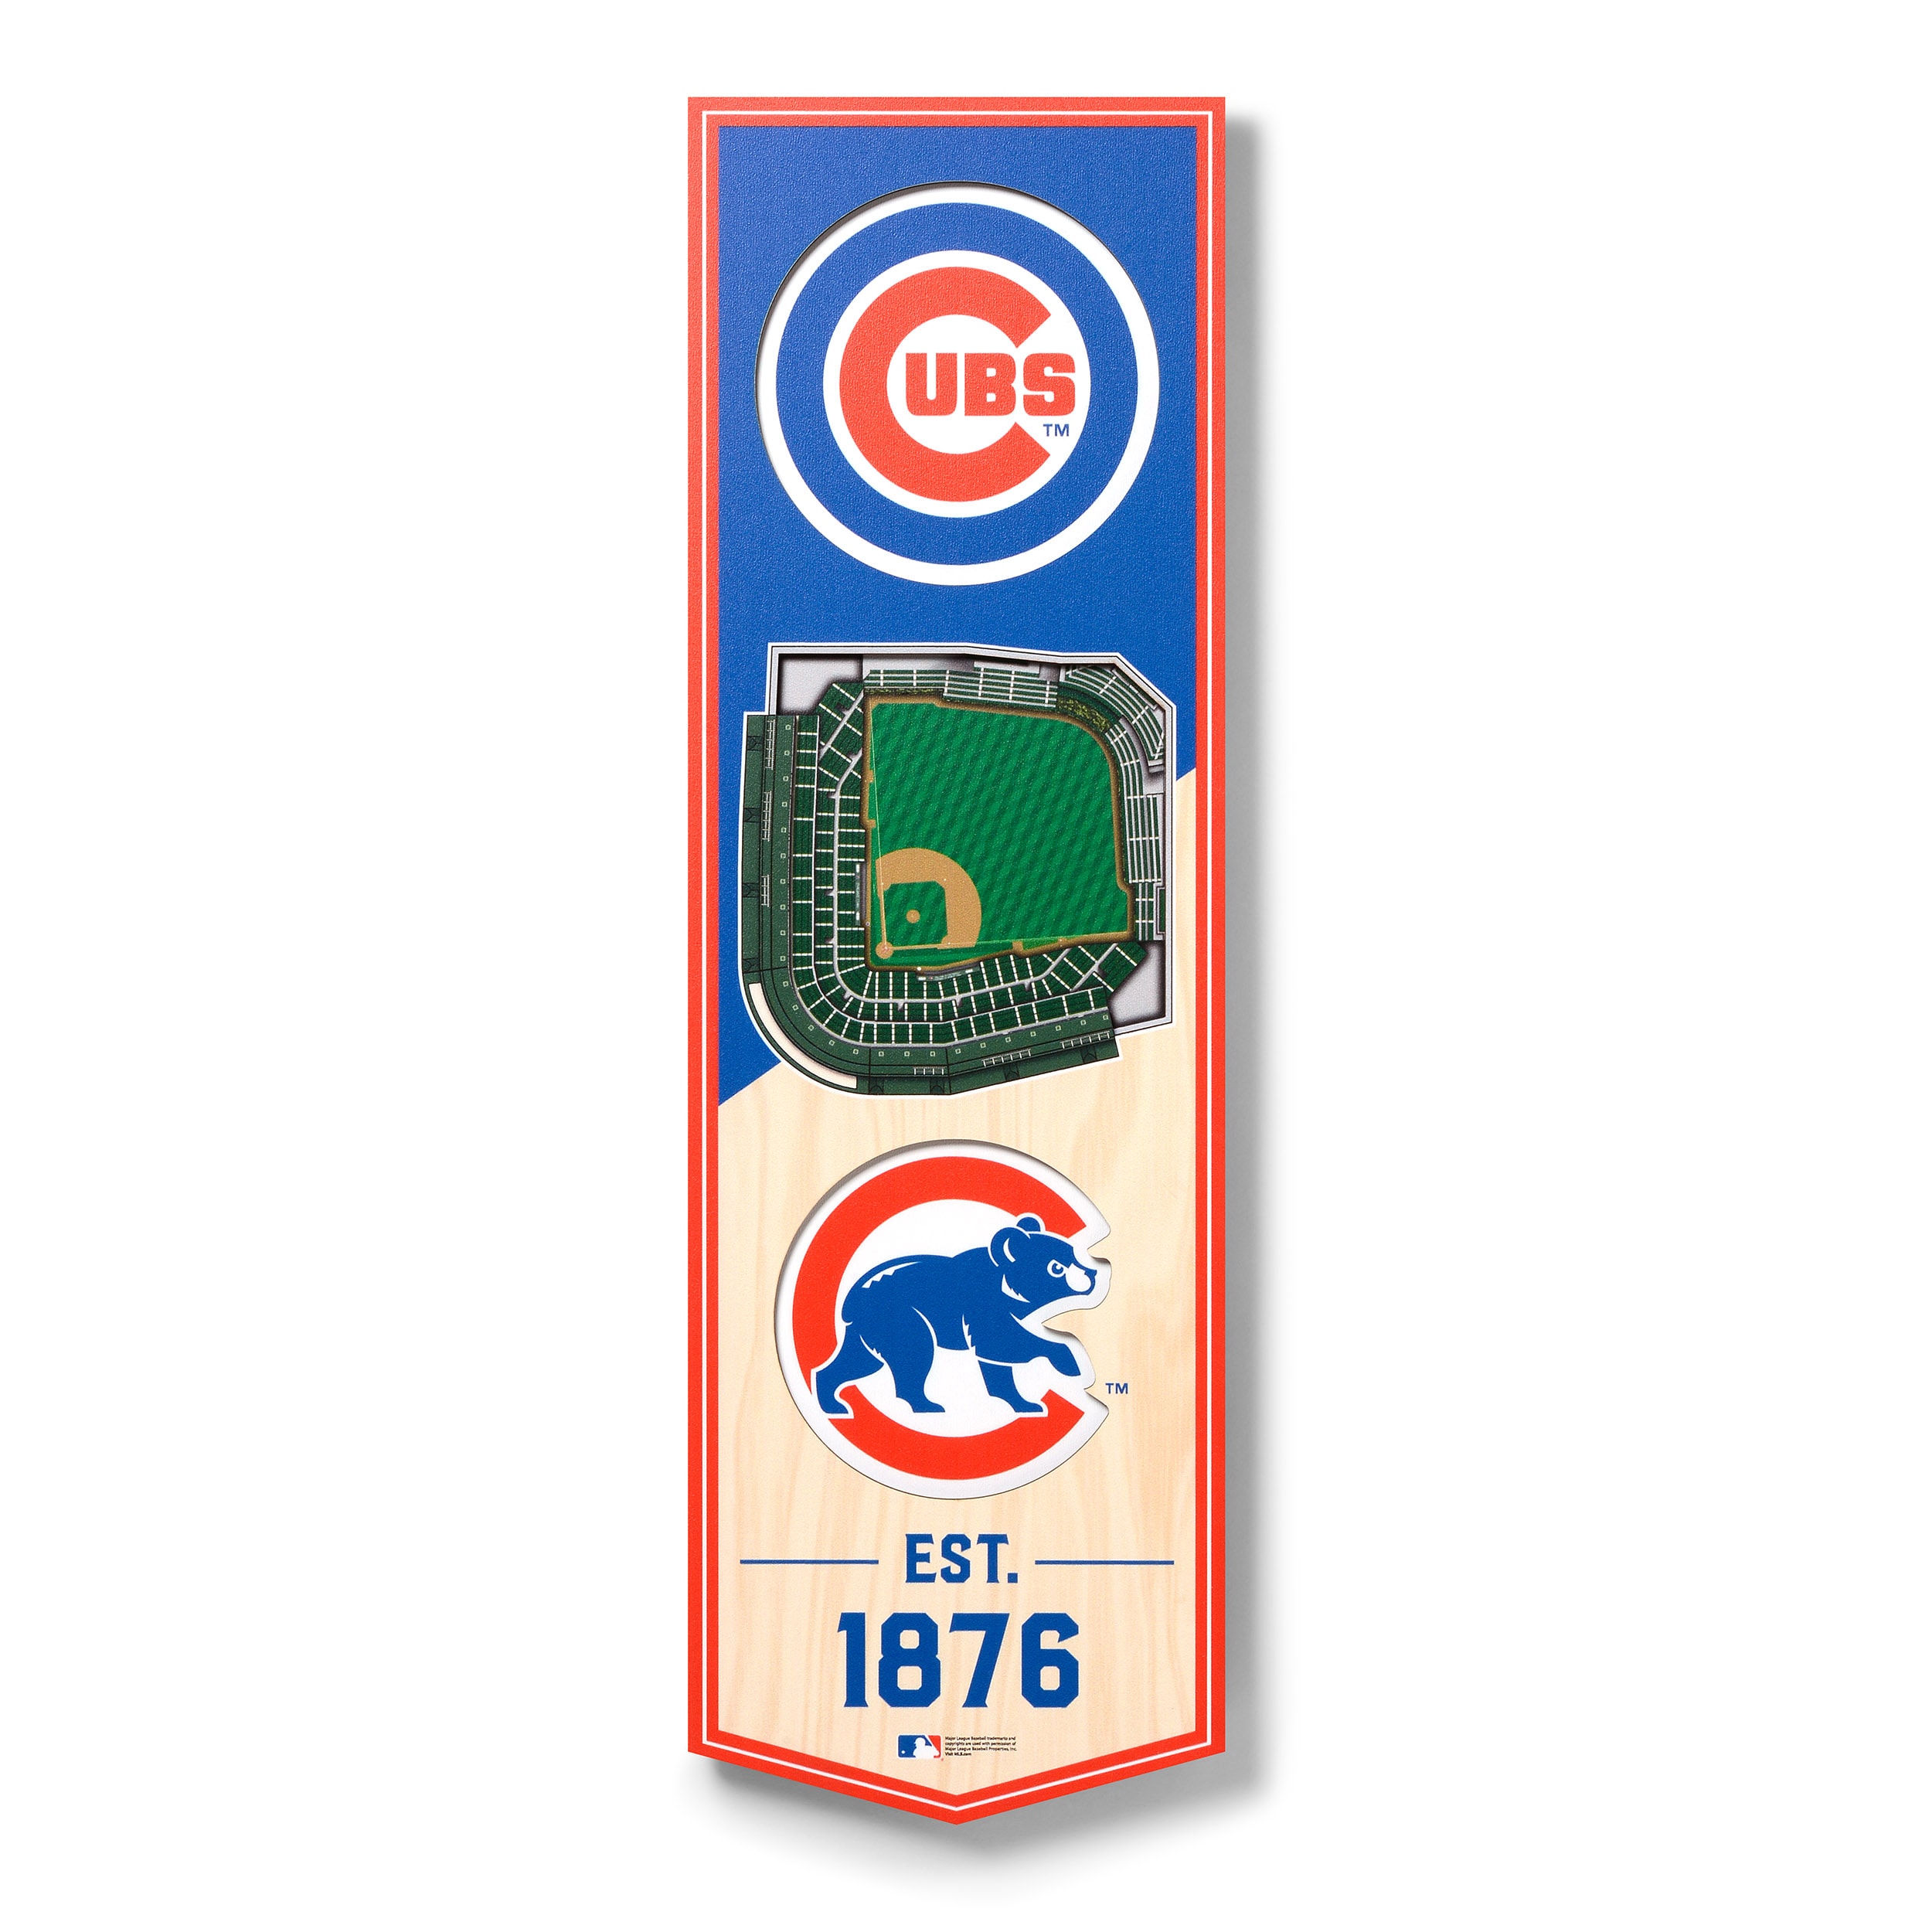 YouTheFan 2507088 12 x 12 in. MLB Chicago Cubs 3D Logo Series Wall Art